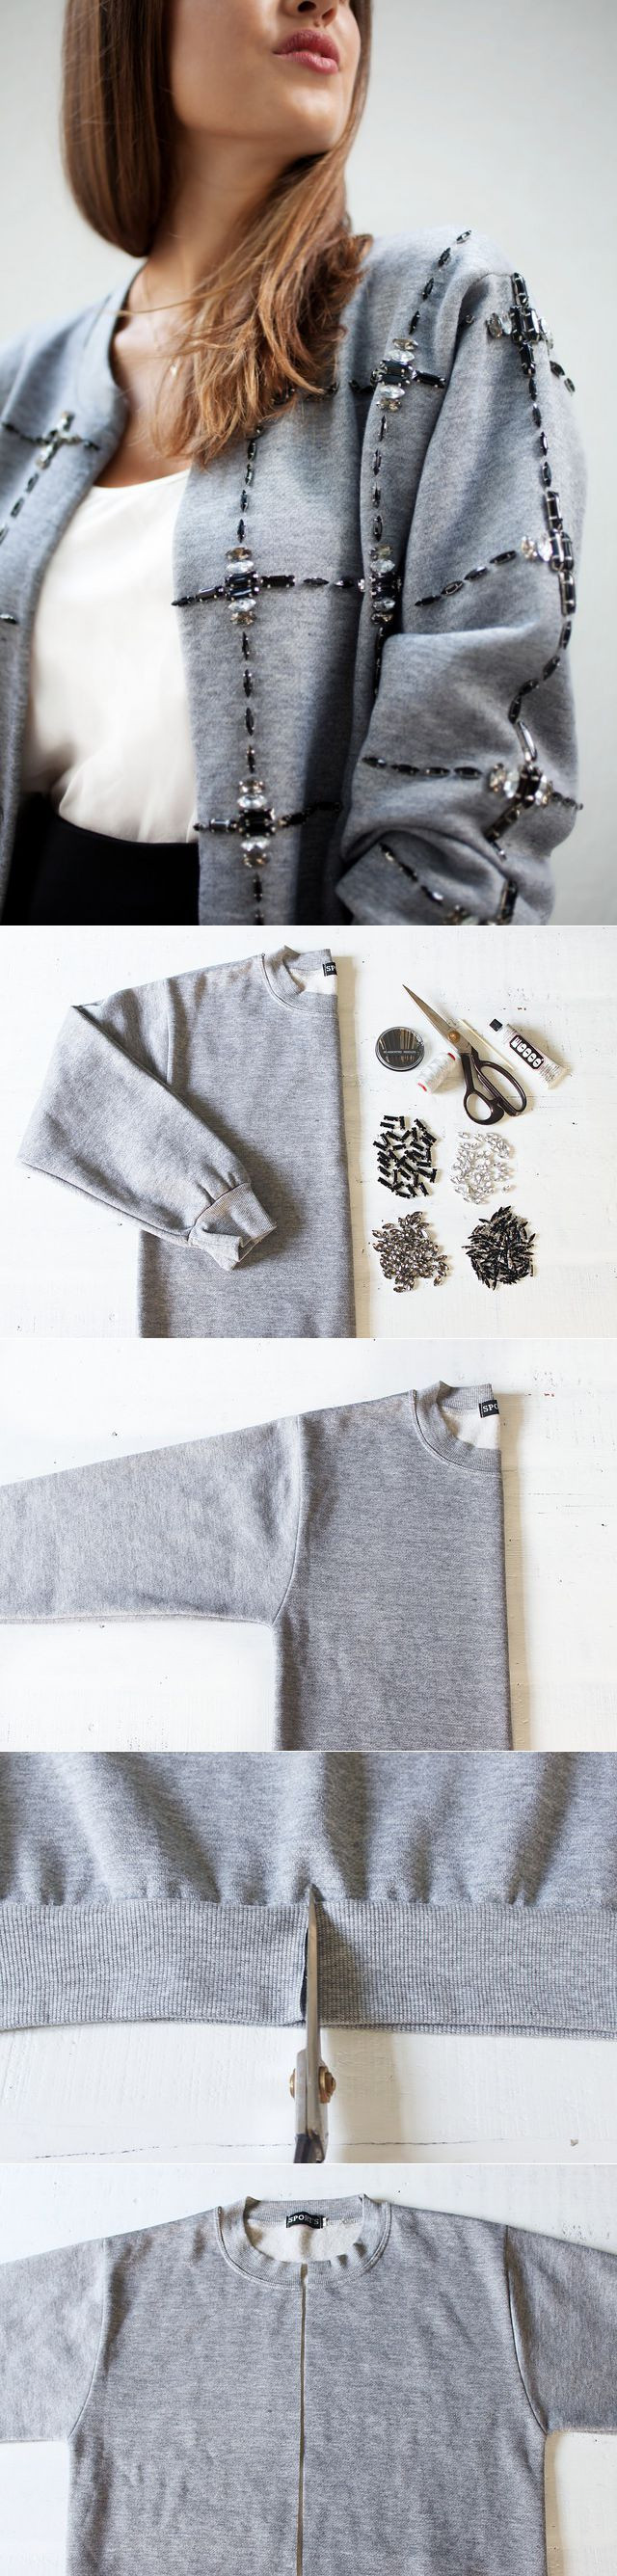 Pinterest Diy Clothes
 25 best ideas about Diy Fashion Projects on Pinterest